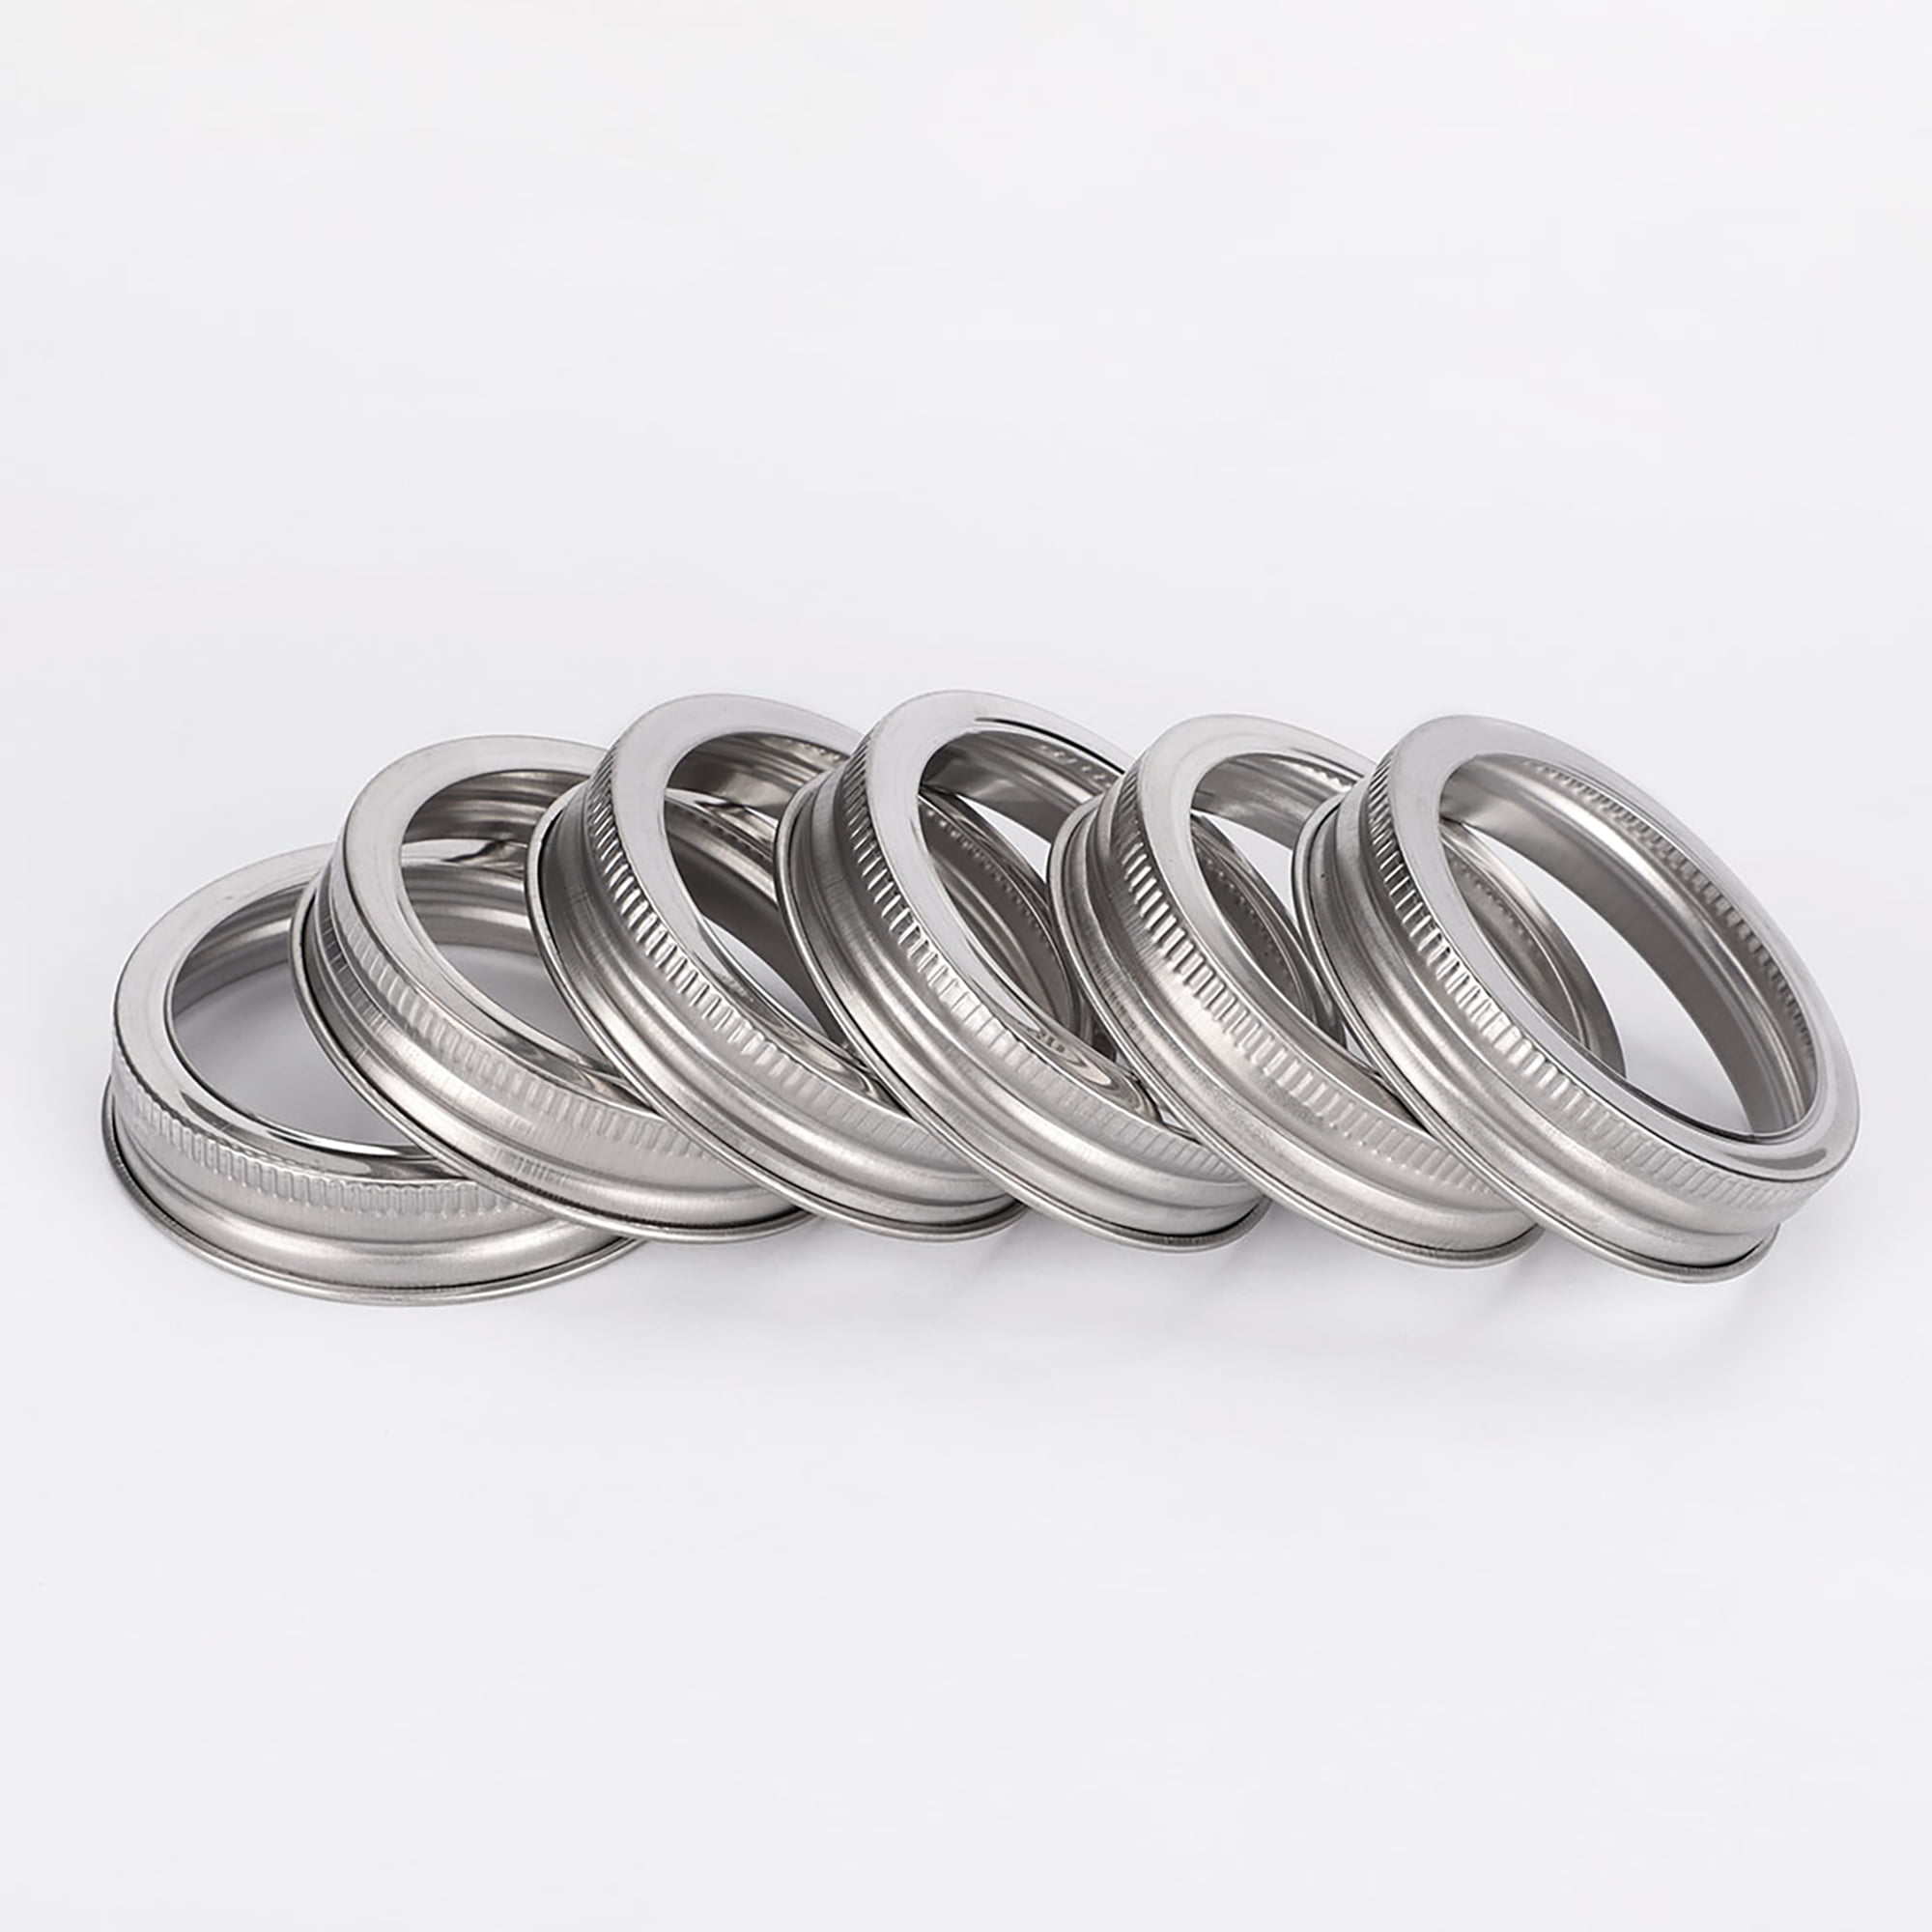 6pcs Stainless Steel Wide Mouth 3.39" Dia Mason Jar Replacement Rings Stainless Steel Mason Jar Rings